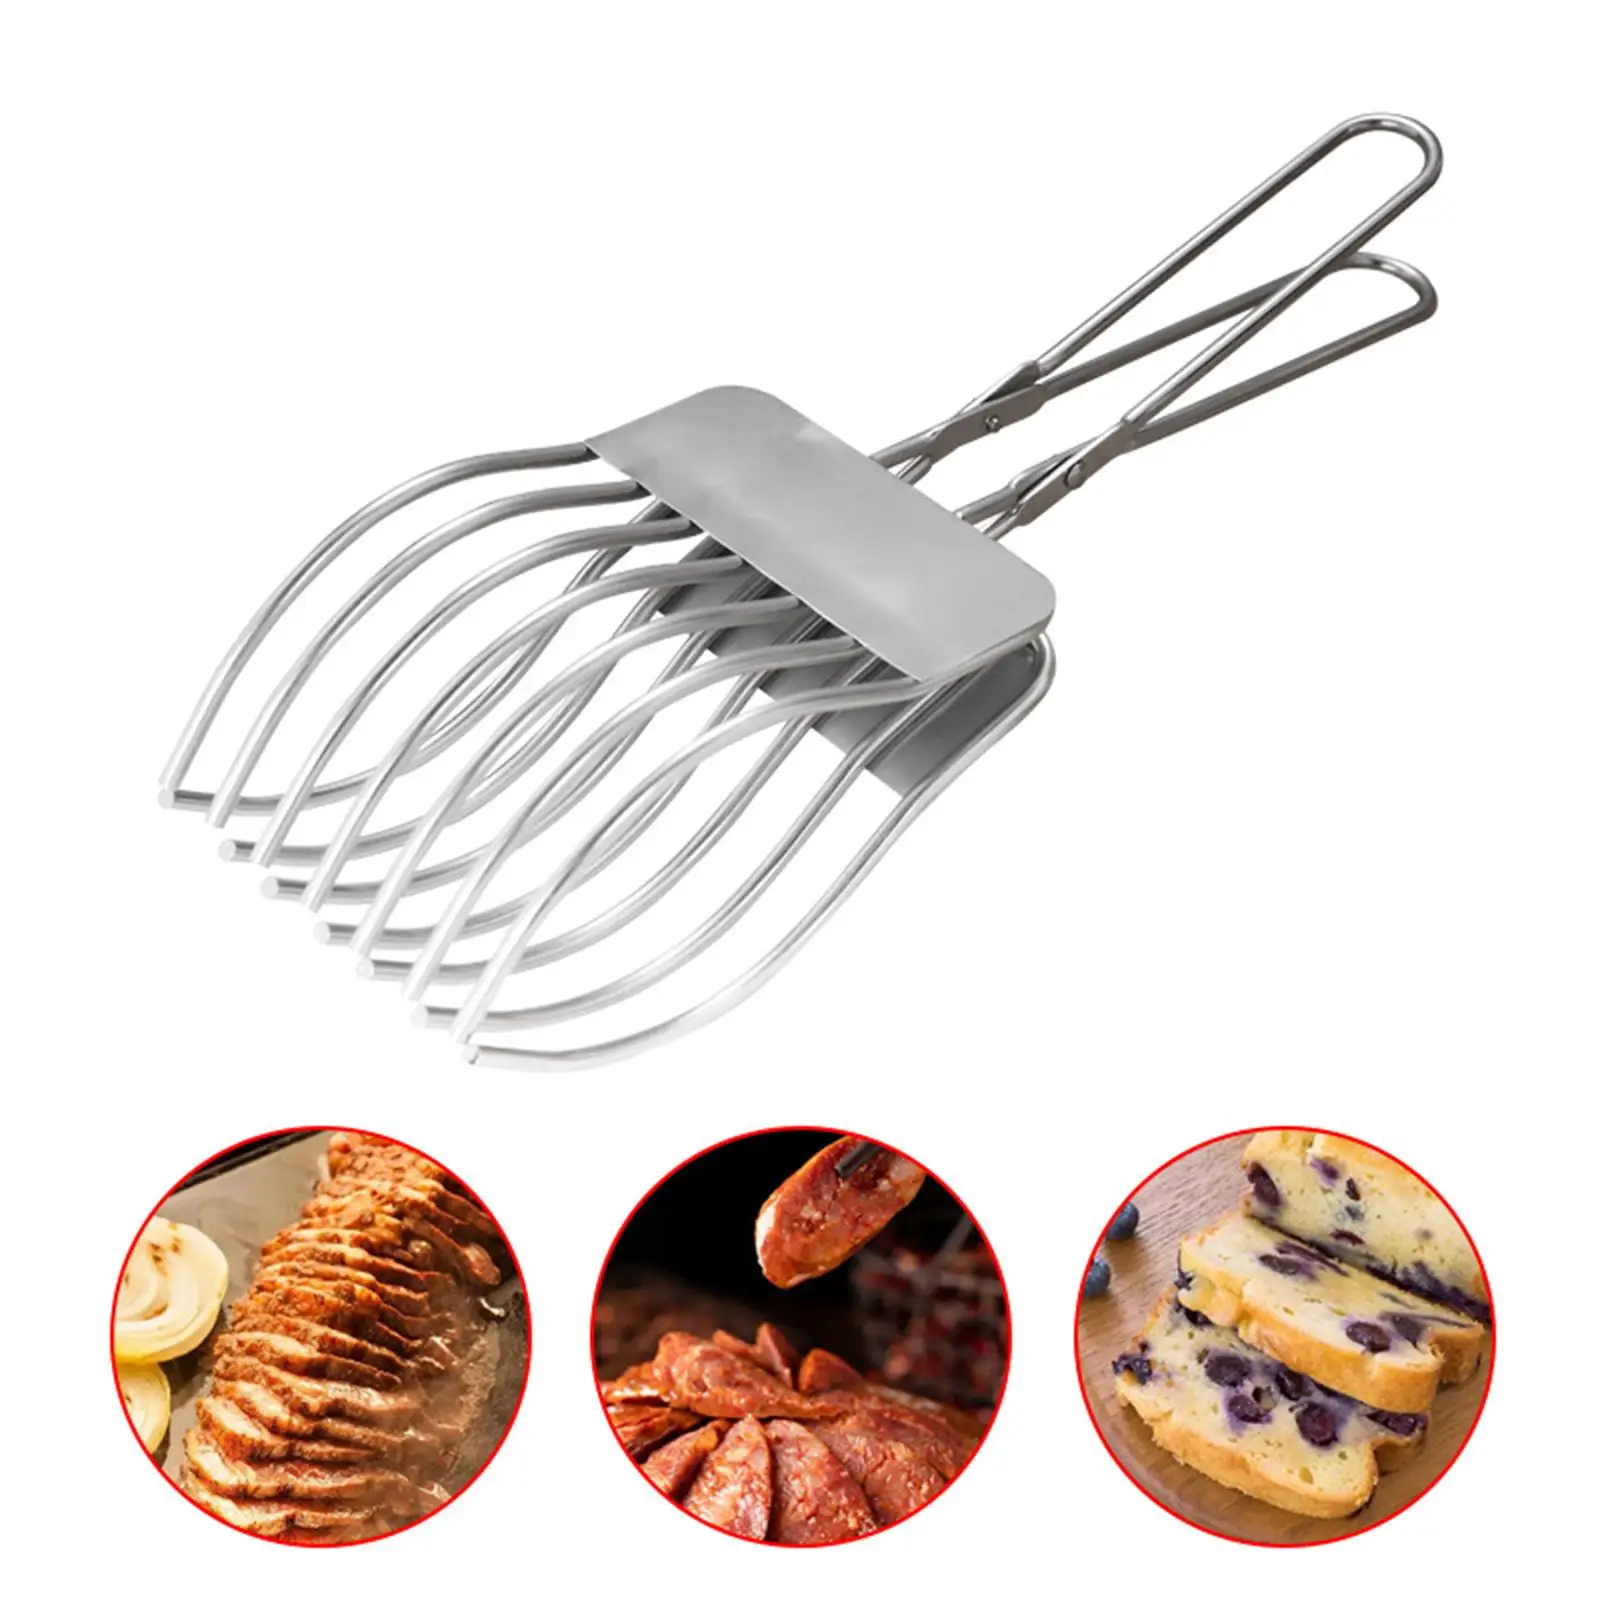 Slicing Kitchen Tools Gadget Bread Holder Buffet Tongs Vegetable Slicer Roast Beef Tongs for Slicing Vegetable